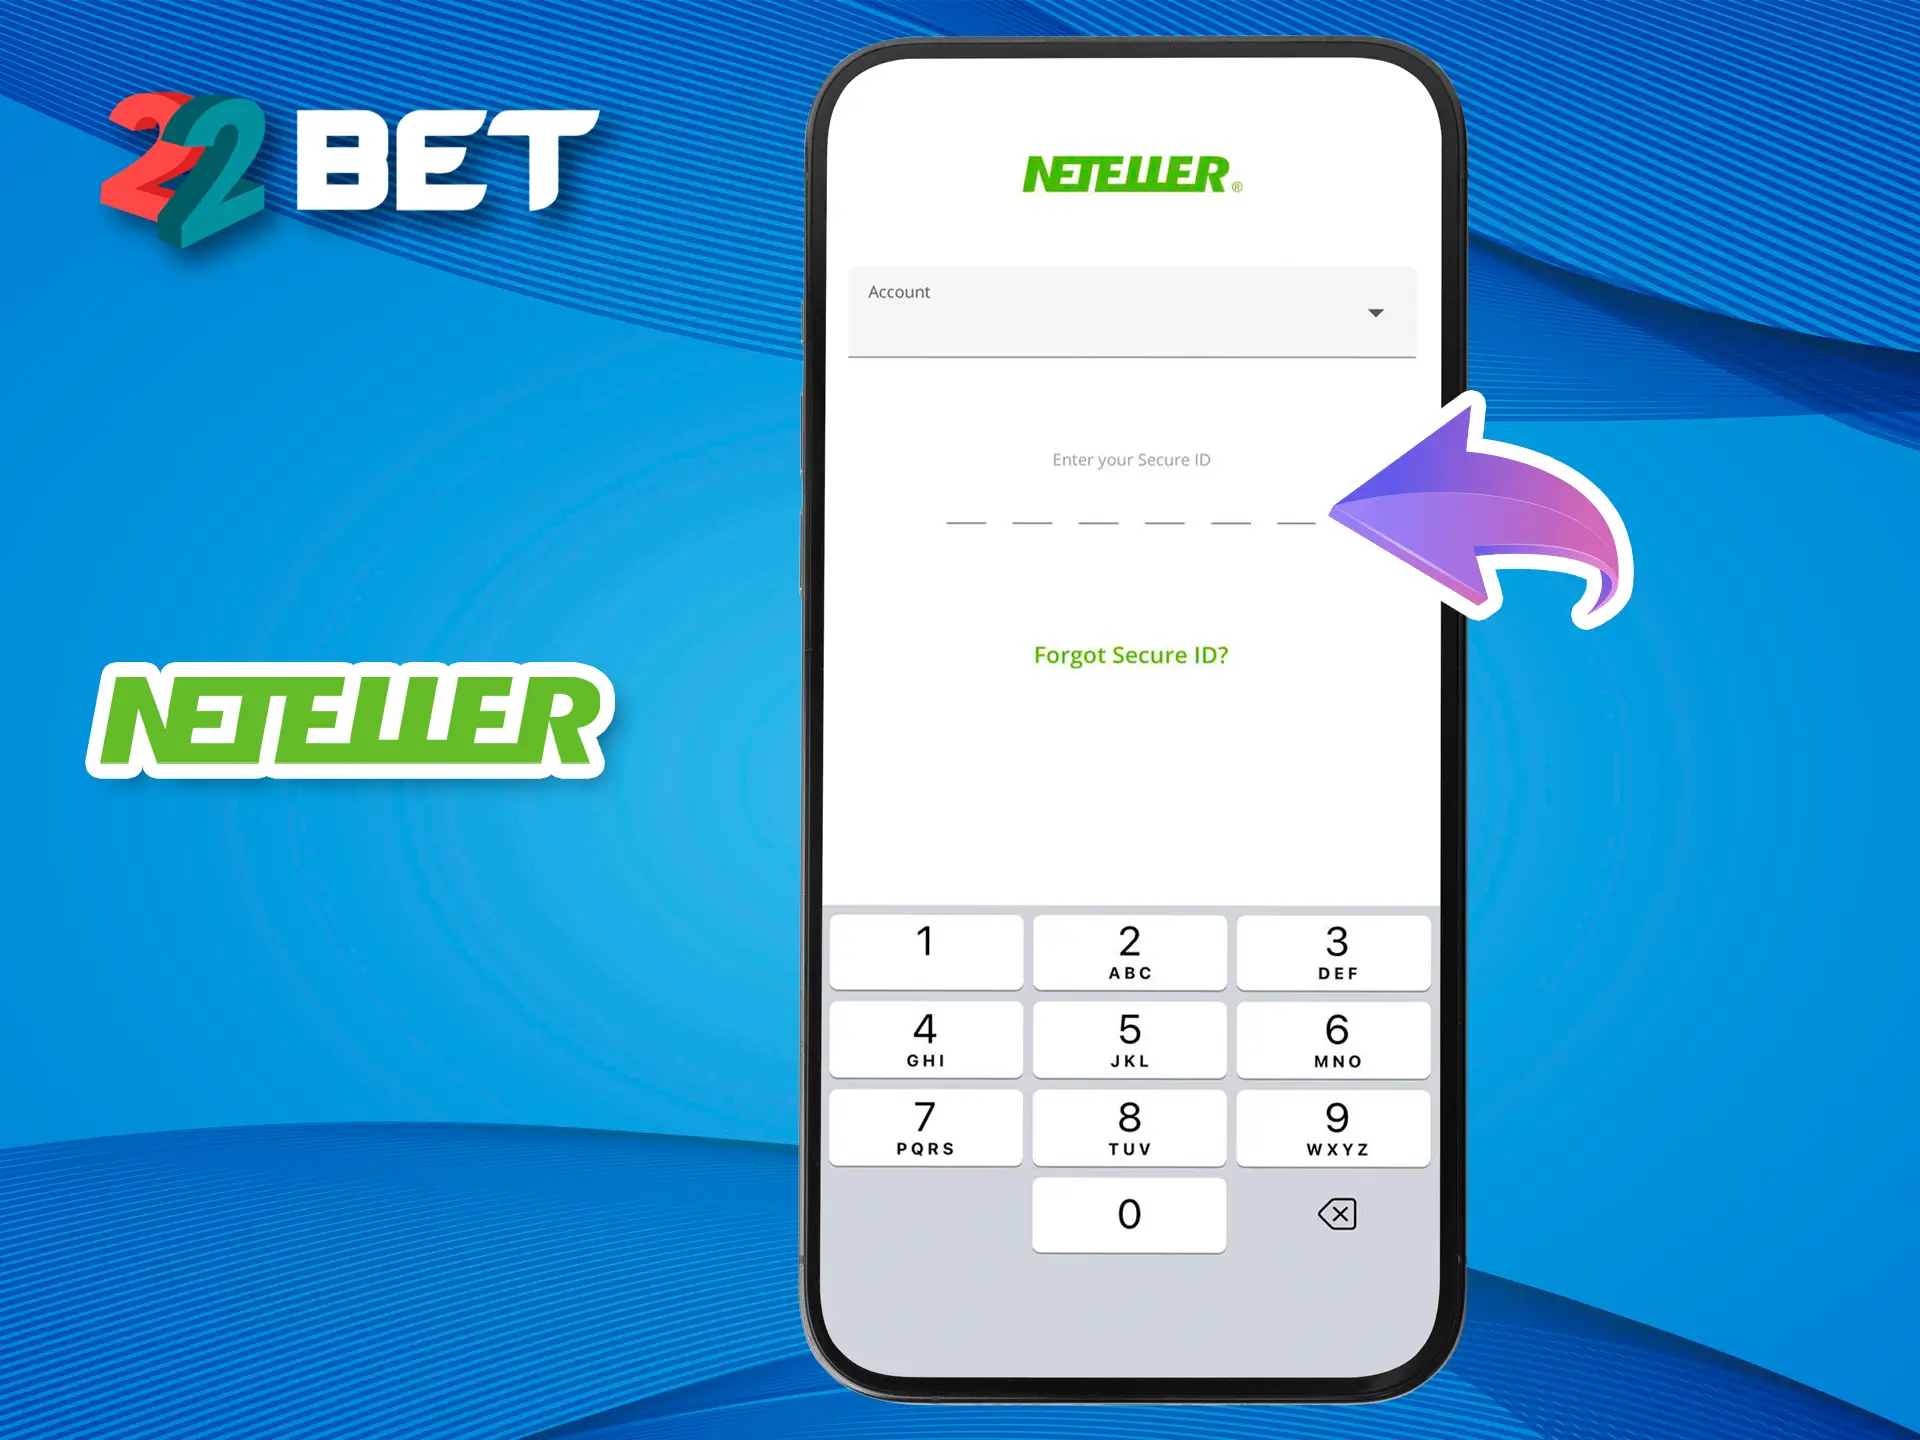 Launch the Neteller app and enter your pin code.